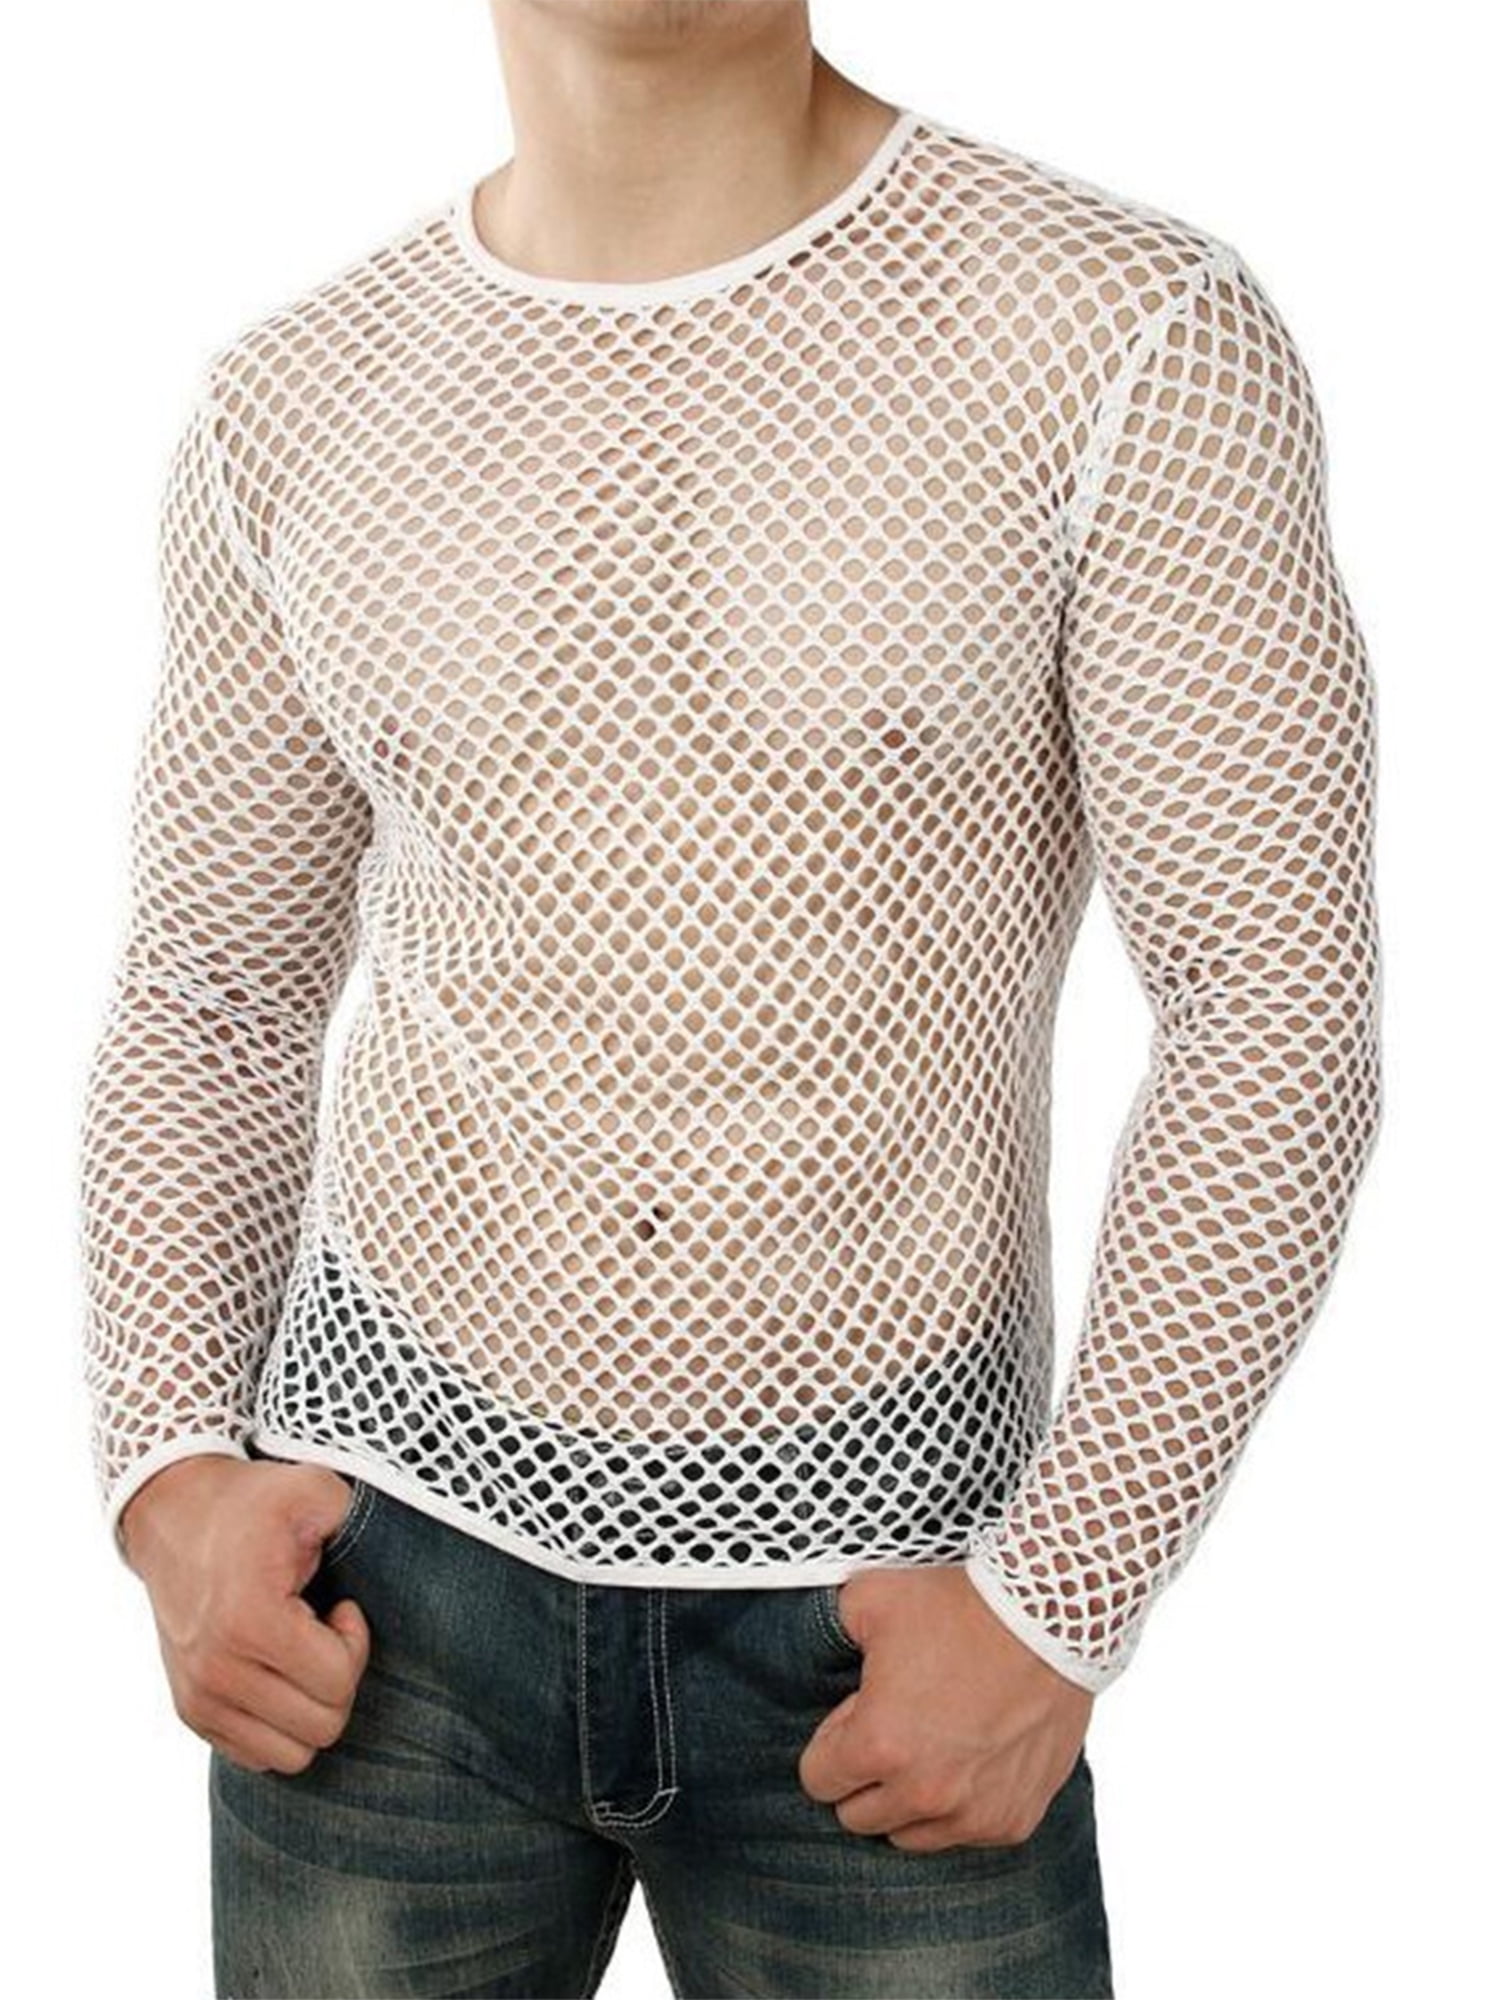 Huakaishijie Men Fishnet Top Mesh See Through Hollow Out Muscle T